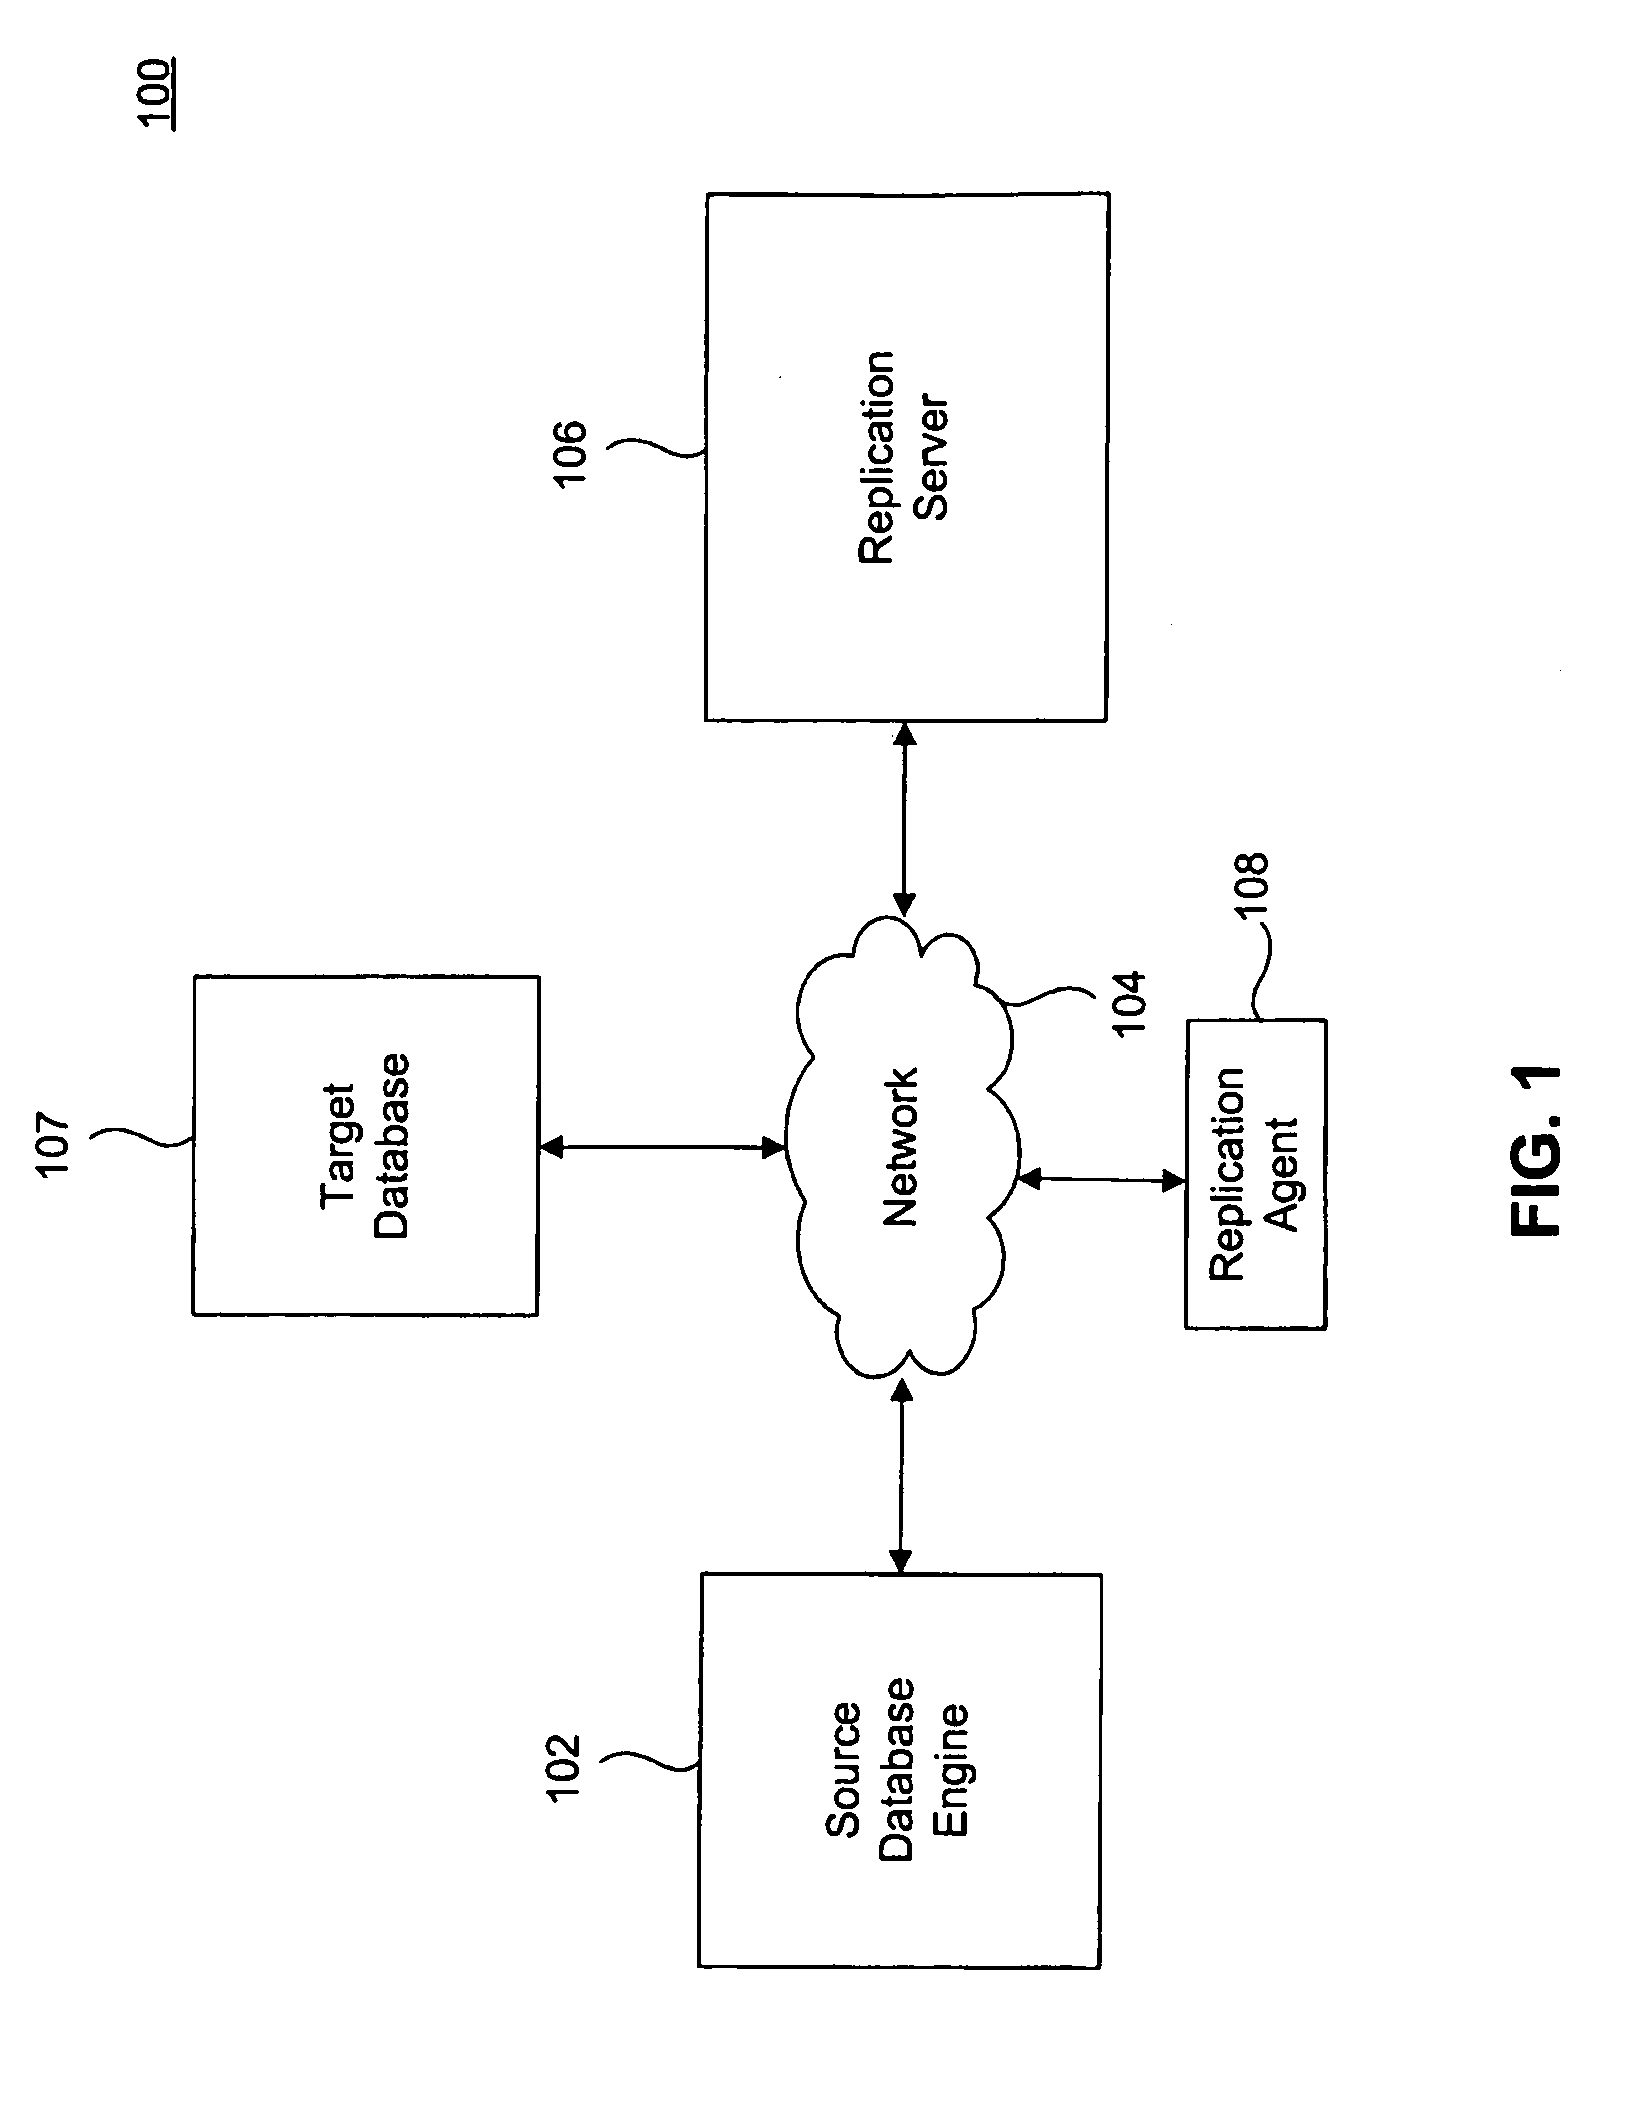 System, Method, and Computer Program Product for Determining SQL Replication Process